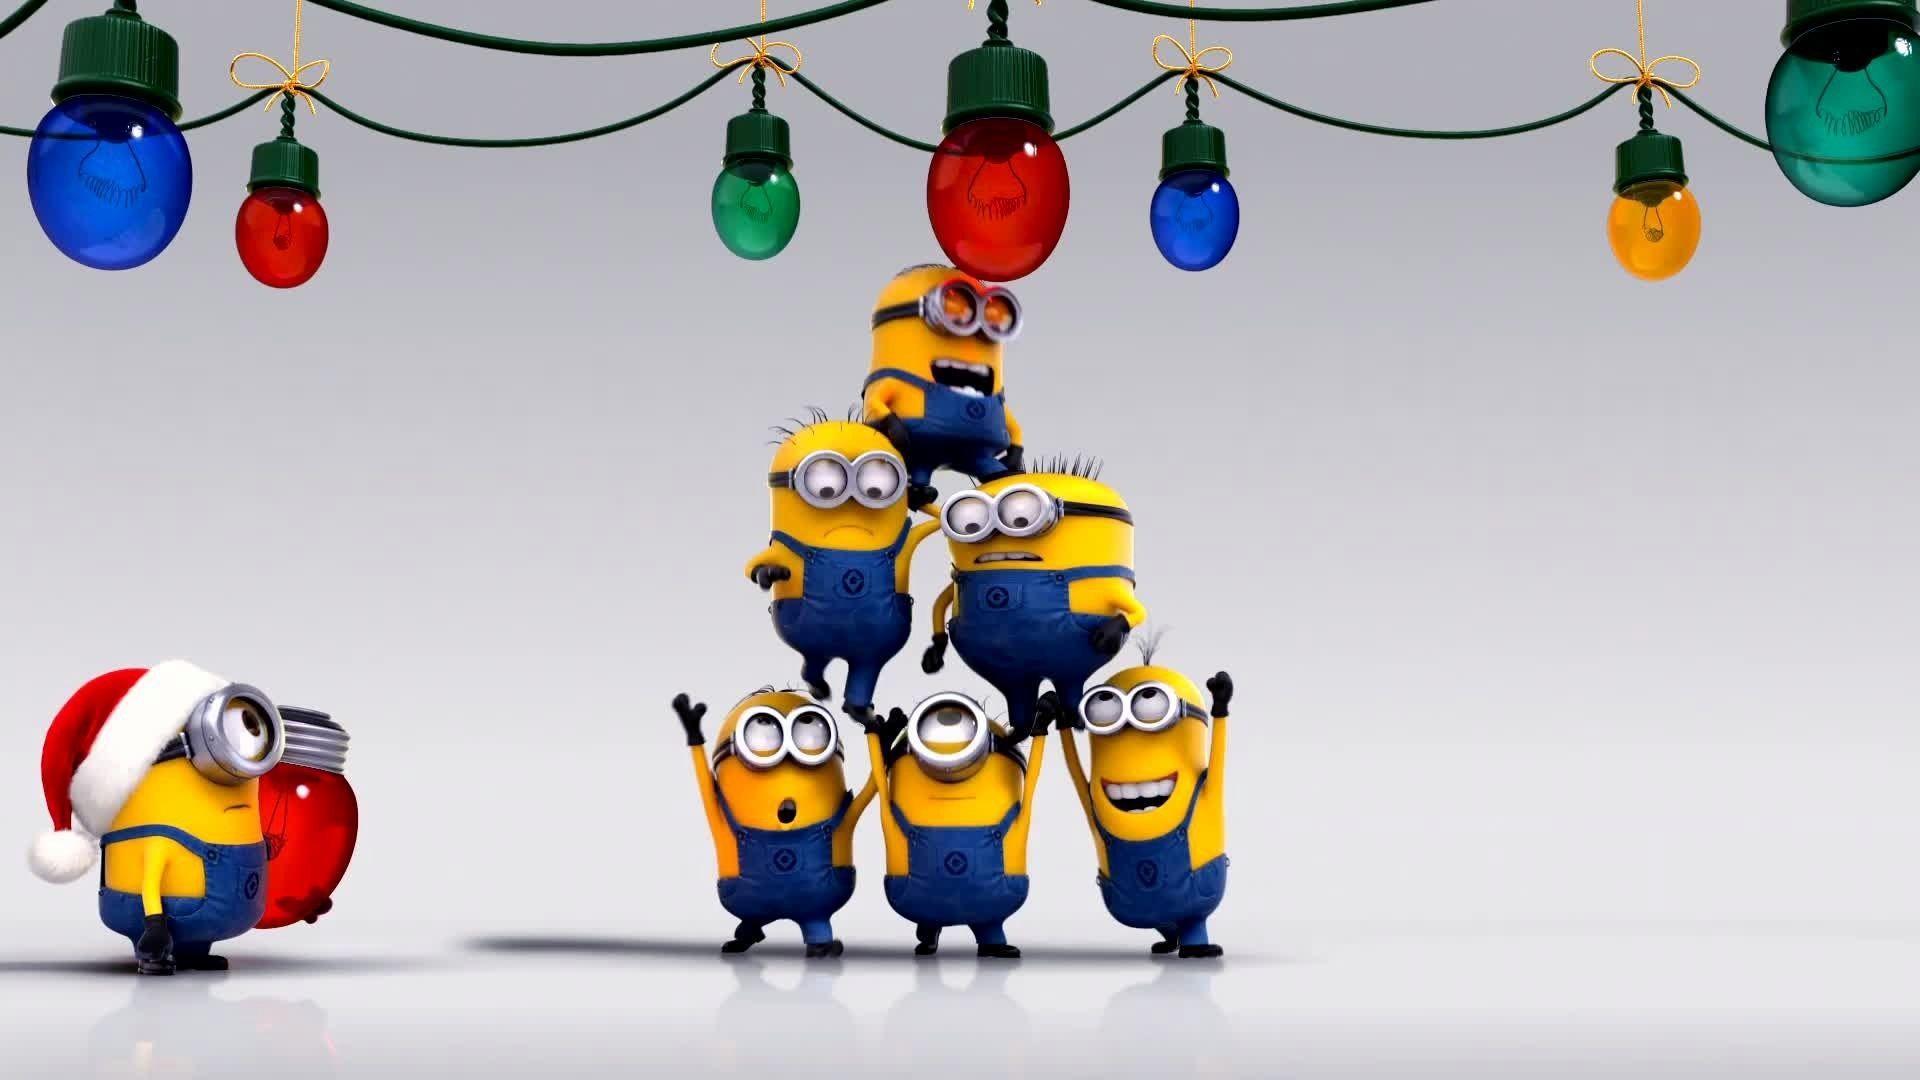 Share 69+ minions christmas wallpaper latest - in.cdgdbentre